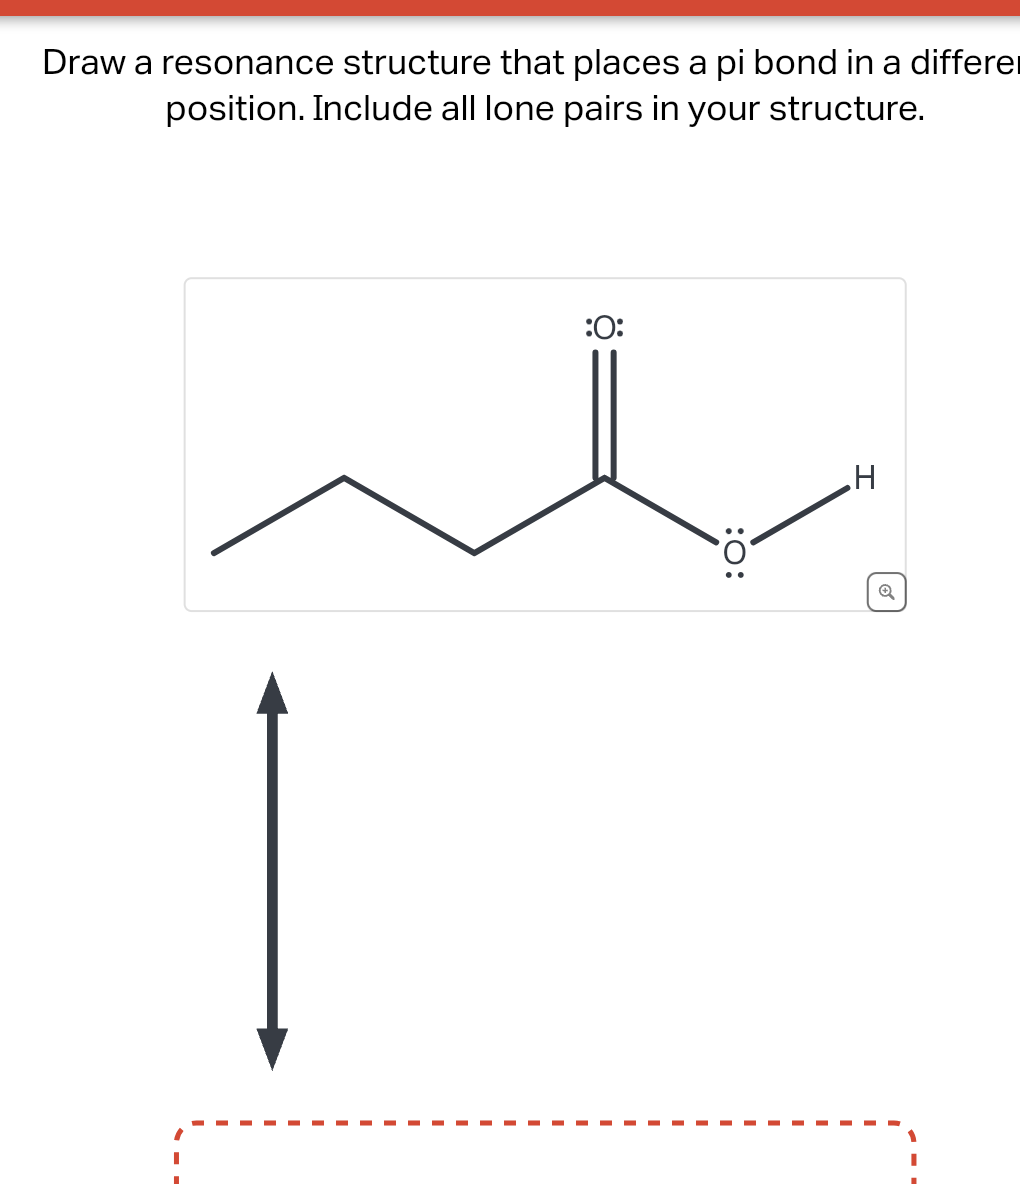 Draw a resonance structure that places a pi bond in a differe
position. Include all lone pairs in your structure.
:0:
:0:
H